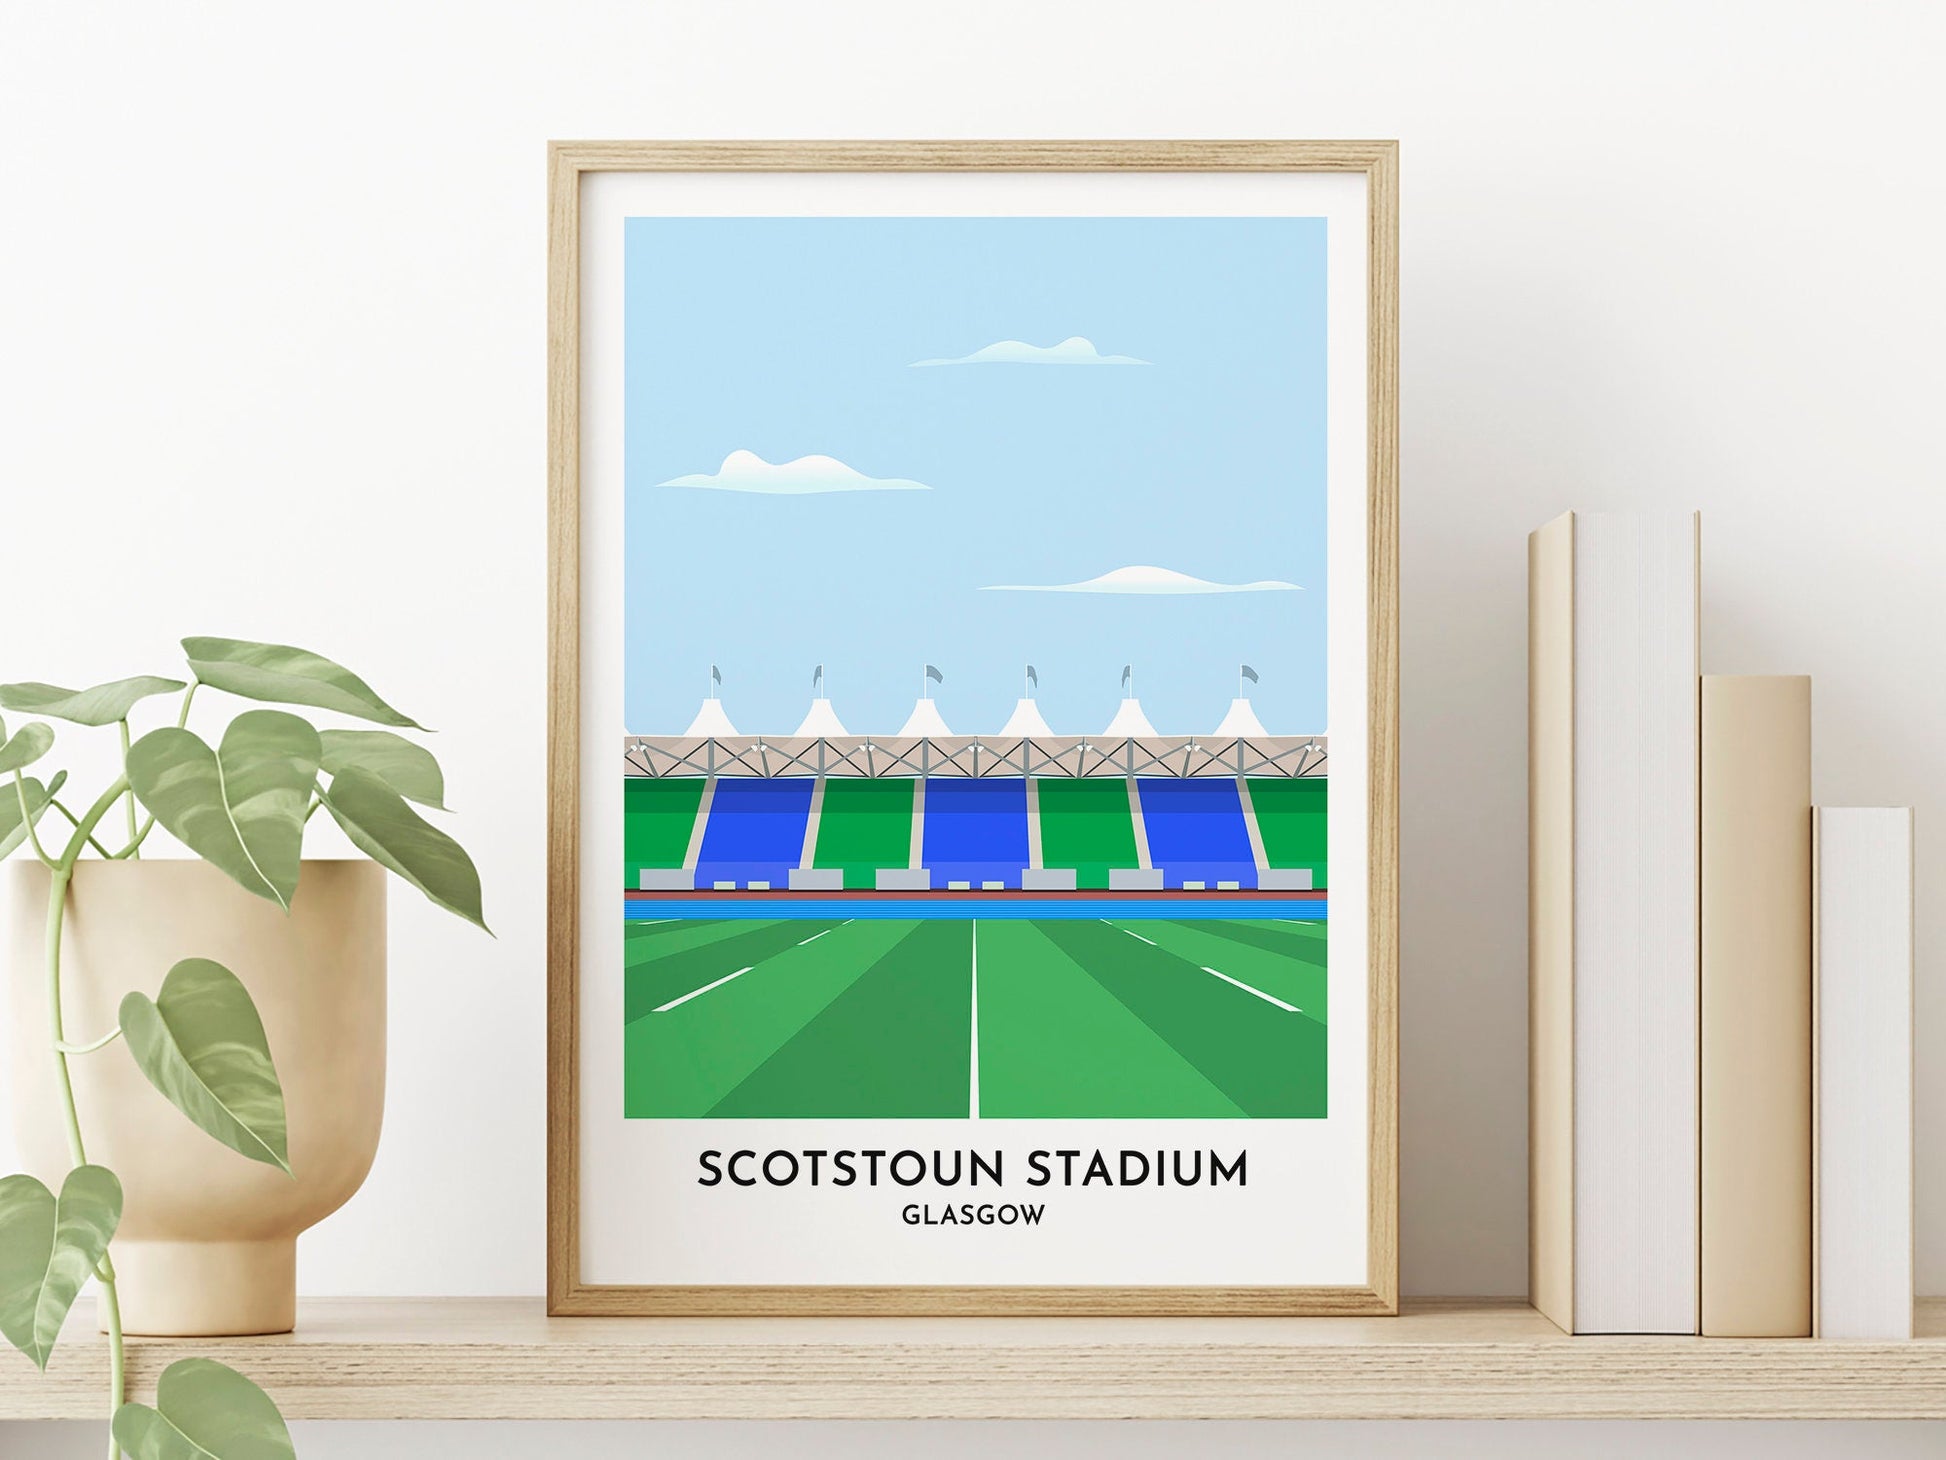 Glasgow Rugby Art Print - Scotstoun Stadium Poster - 50th Birthday Gift for Him - Rugby Fan Present - Turf Football Art